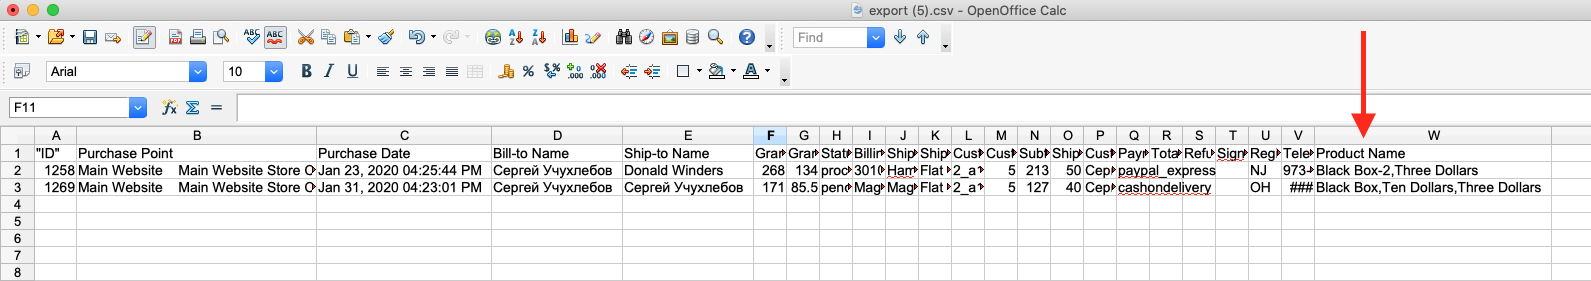 And here is the result of the export (CSV):